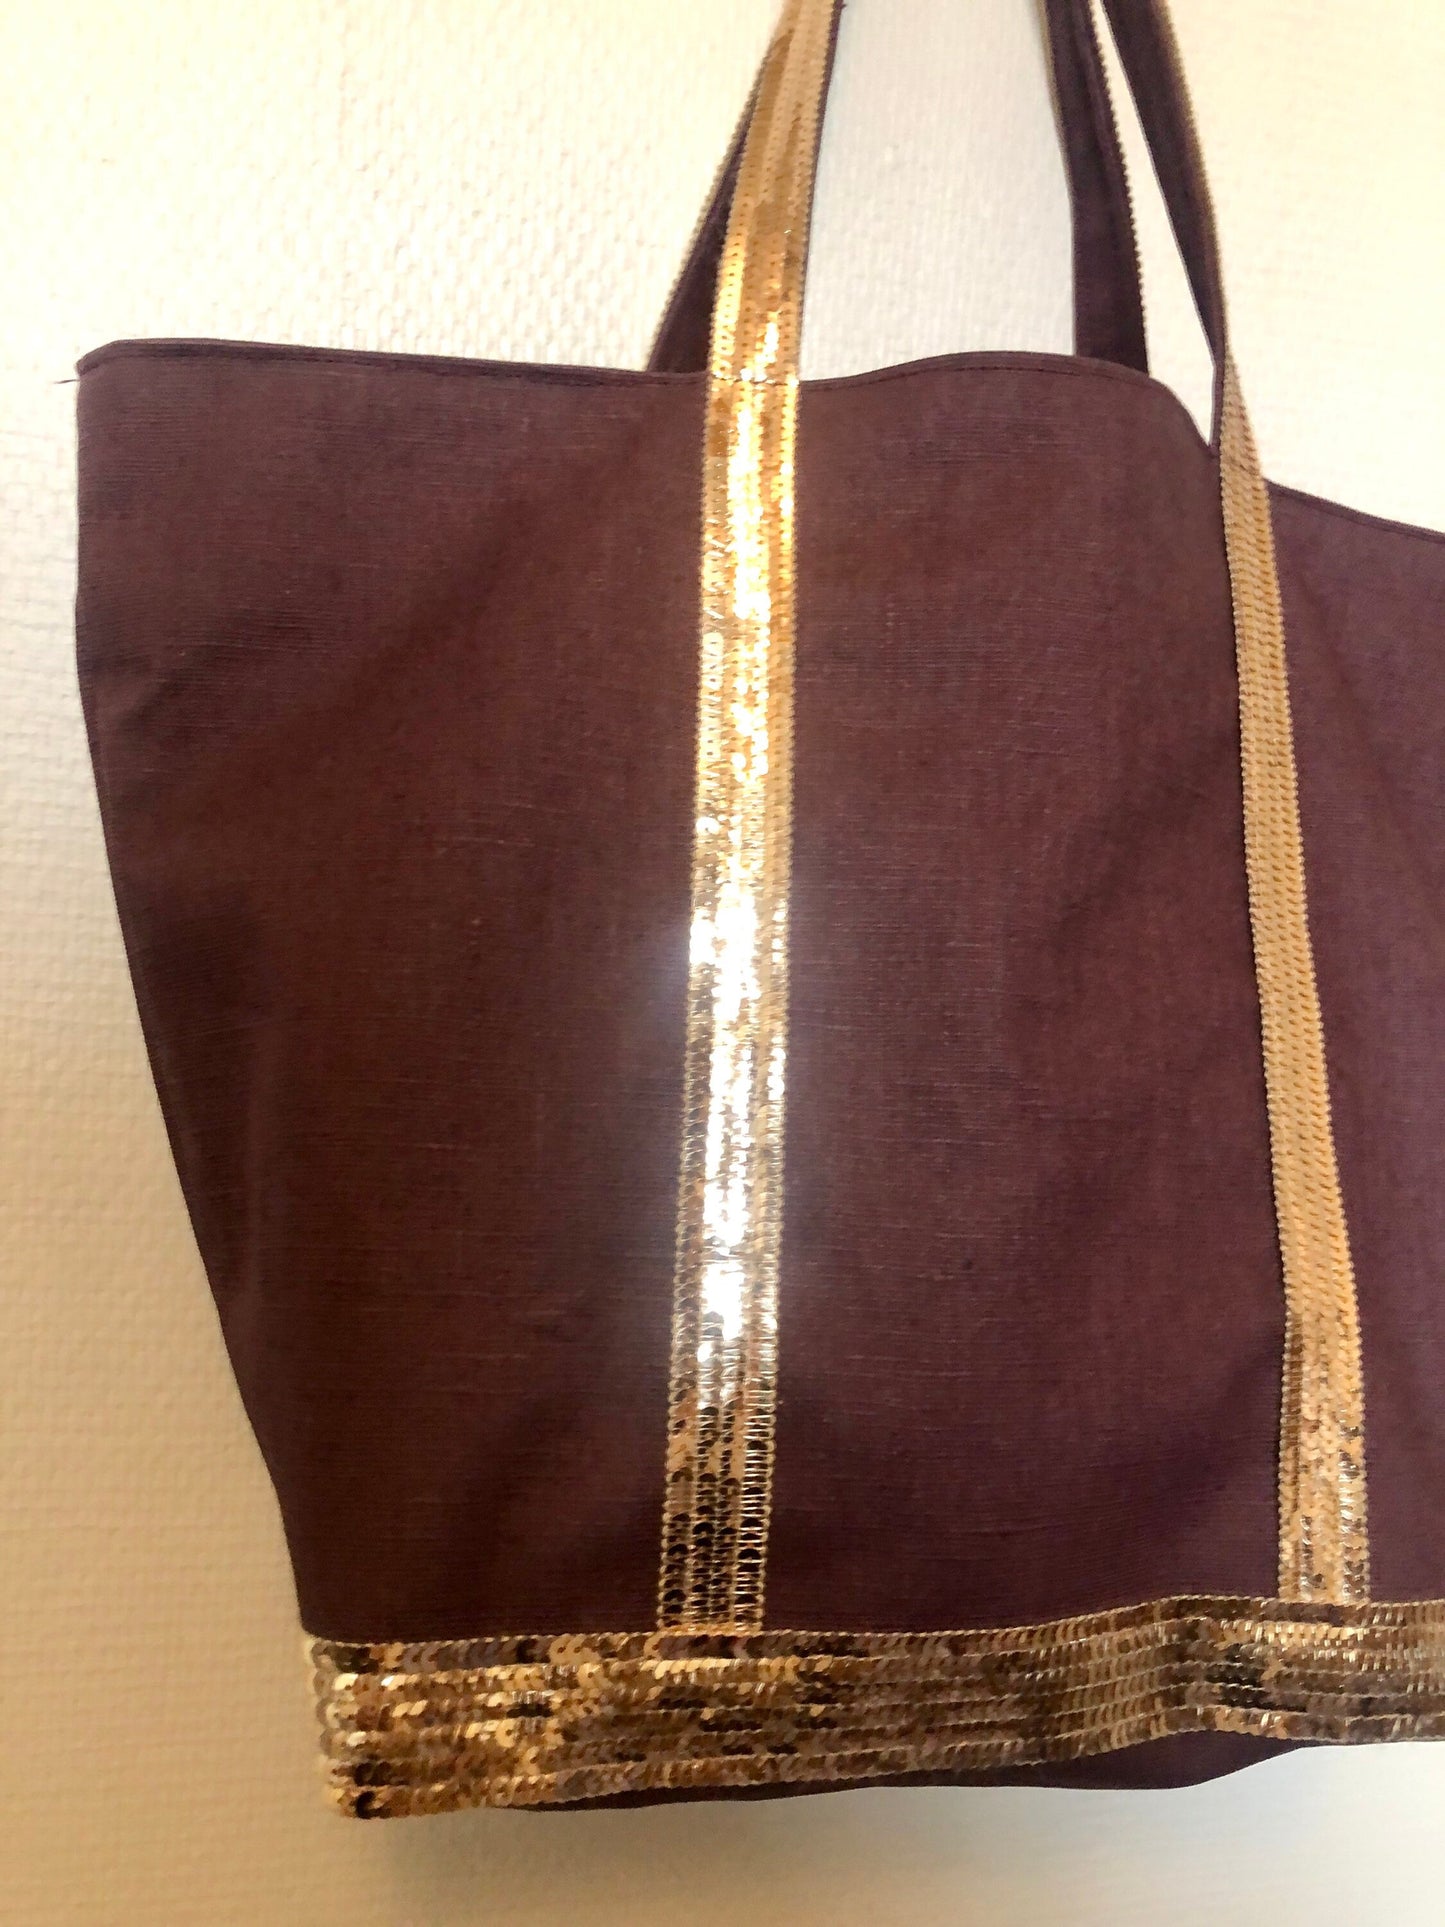 Plum coated linen shopping bag with gold glitter